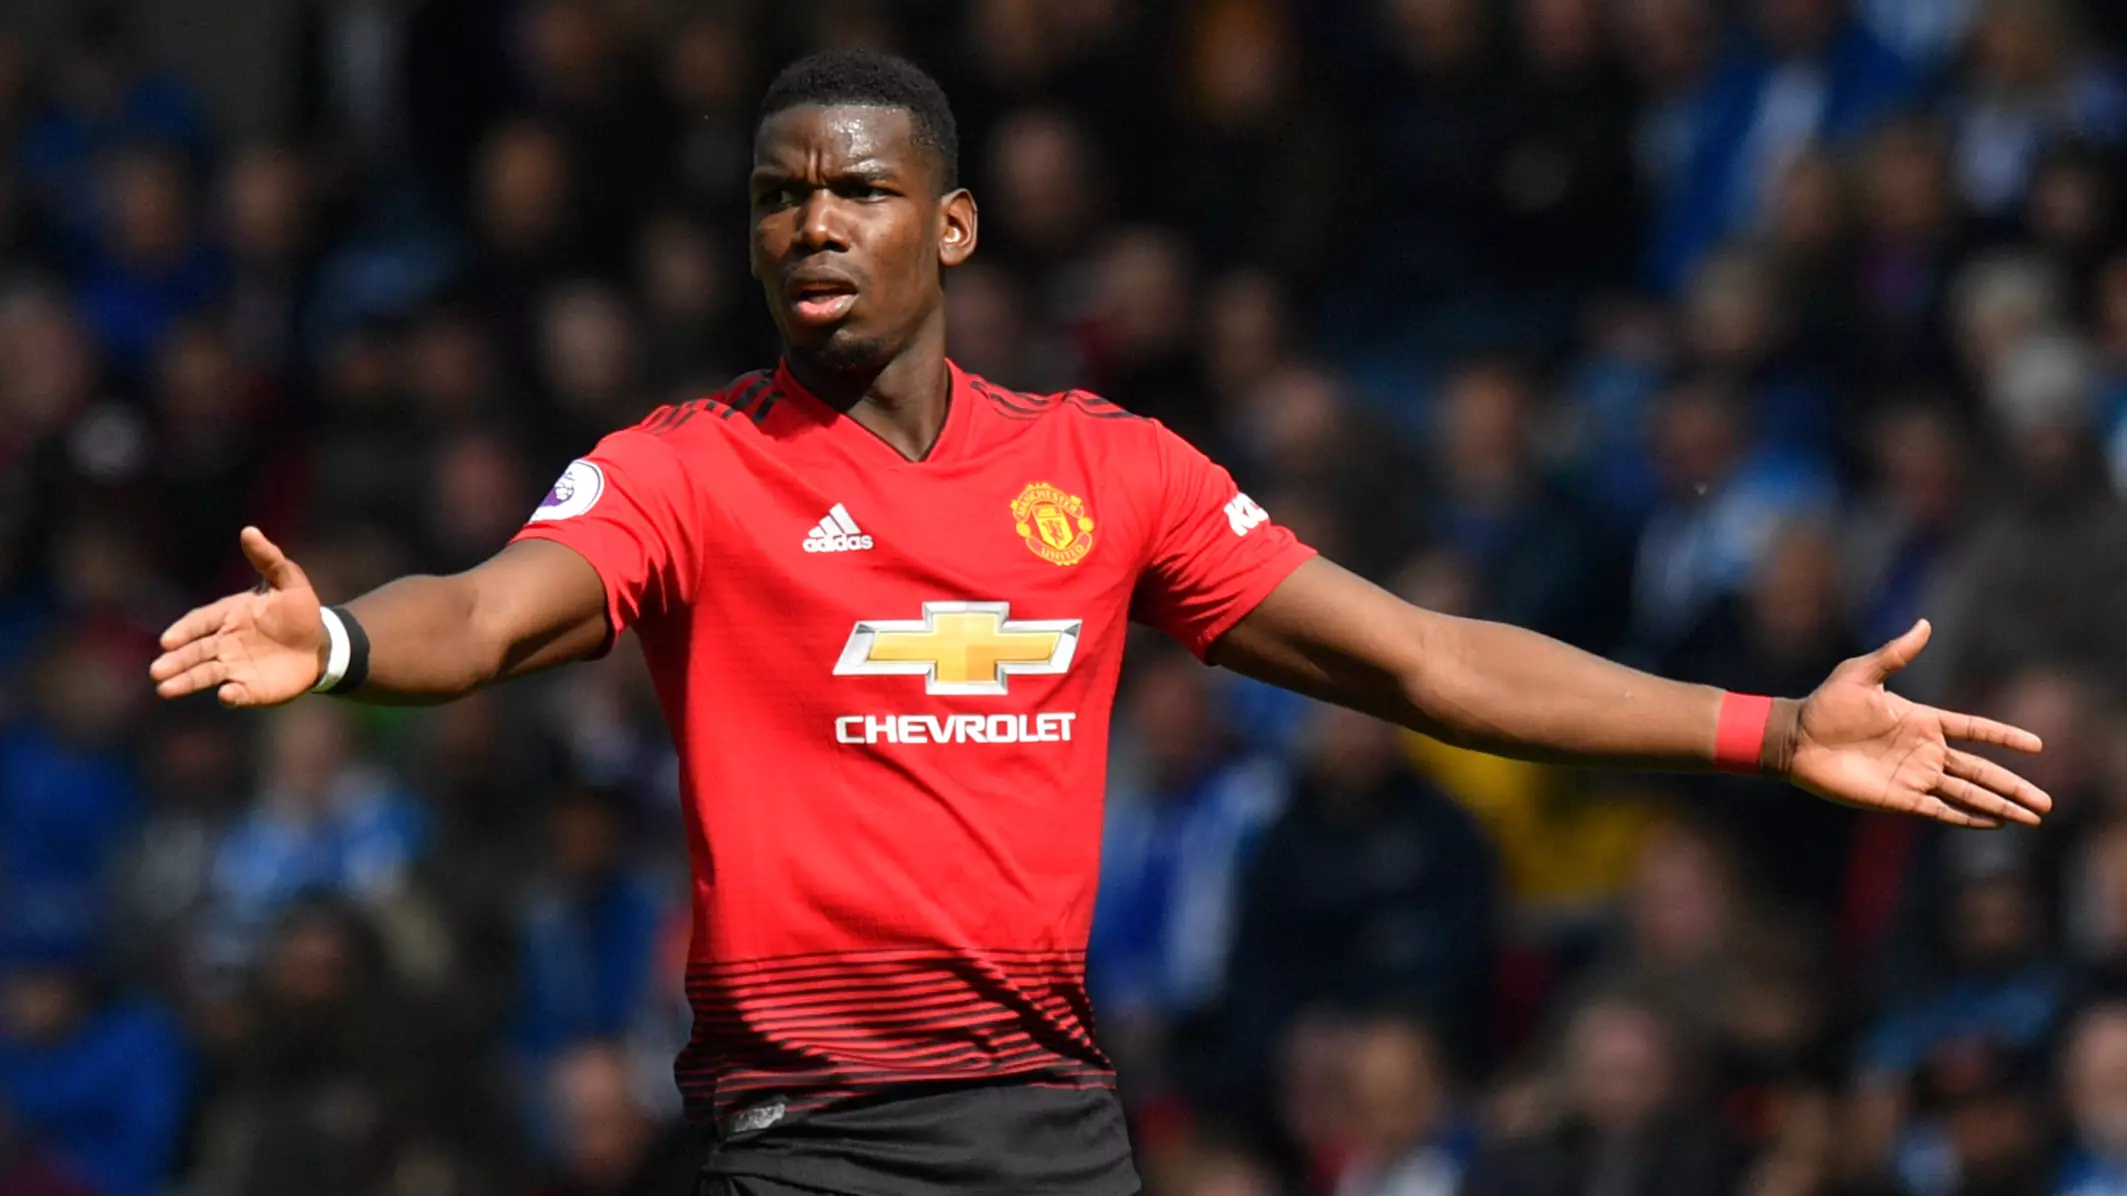 Angry Fans Hurl Abuse At Manchester United's Paul Pogba 